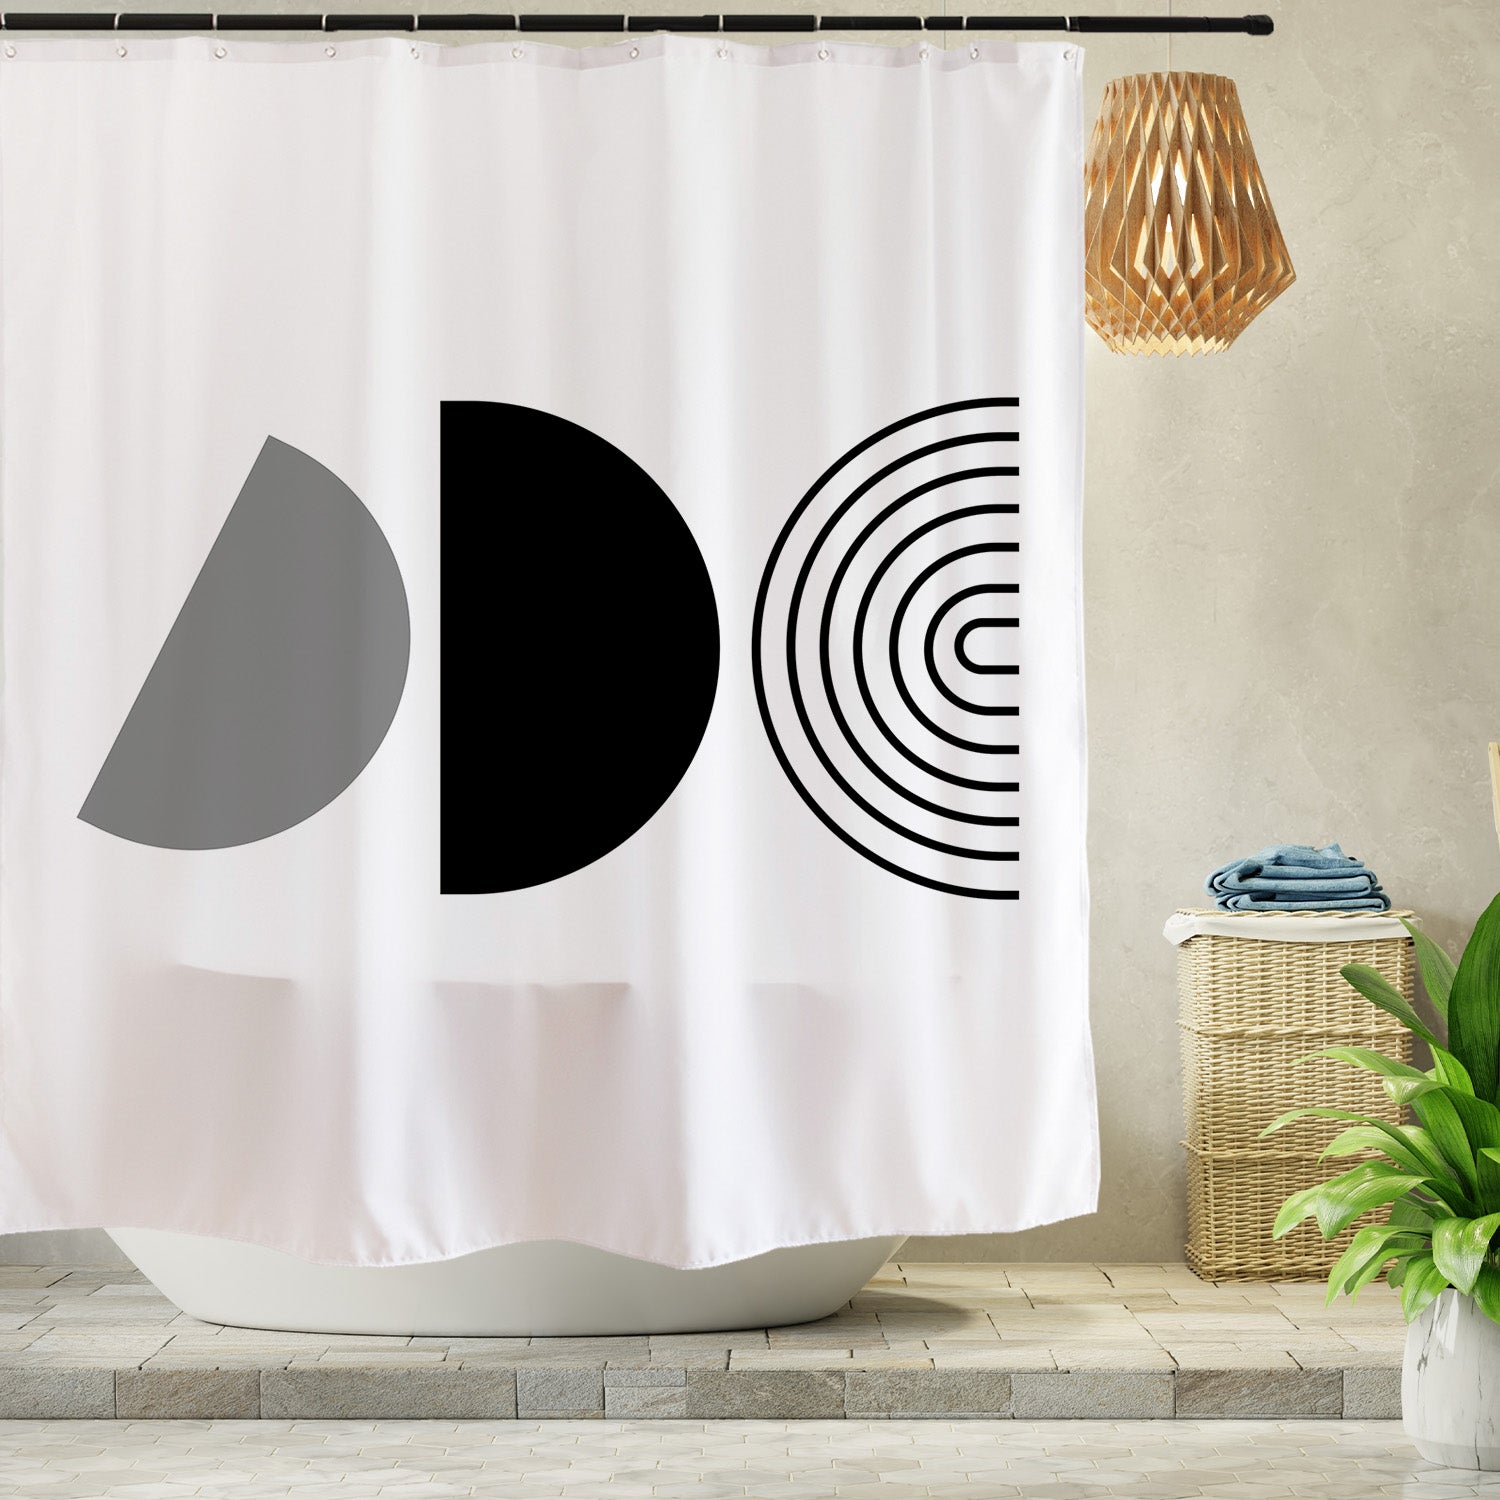 Feblilac Black and White Line Semicircle Shower Curtain with Hooks